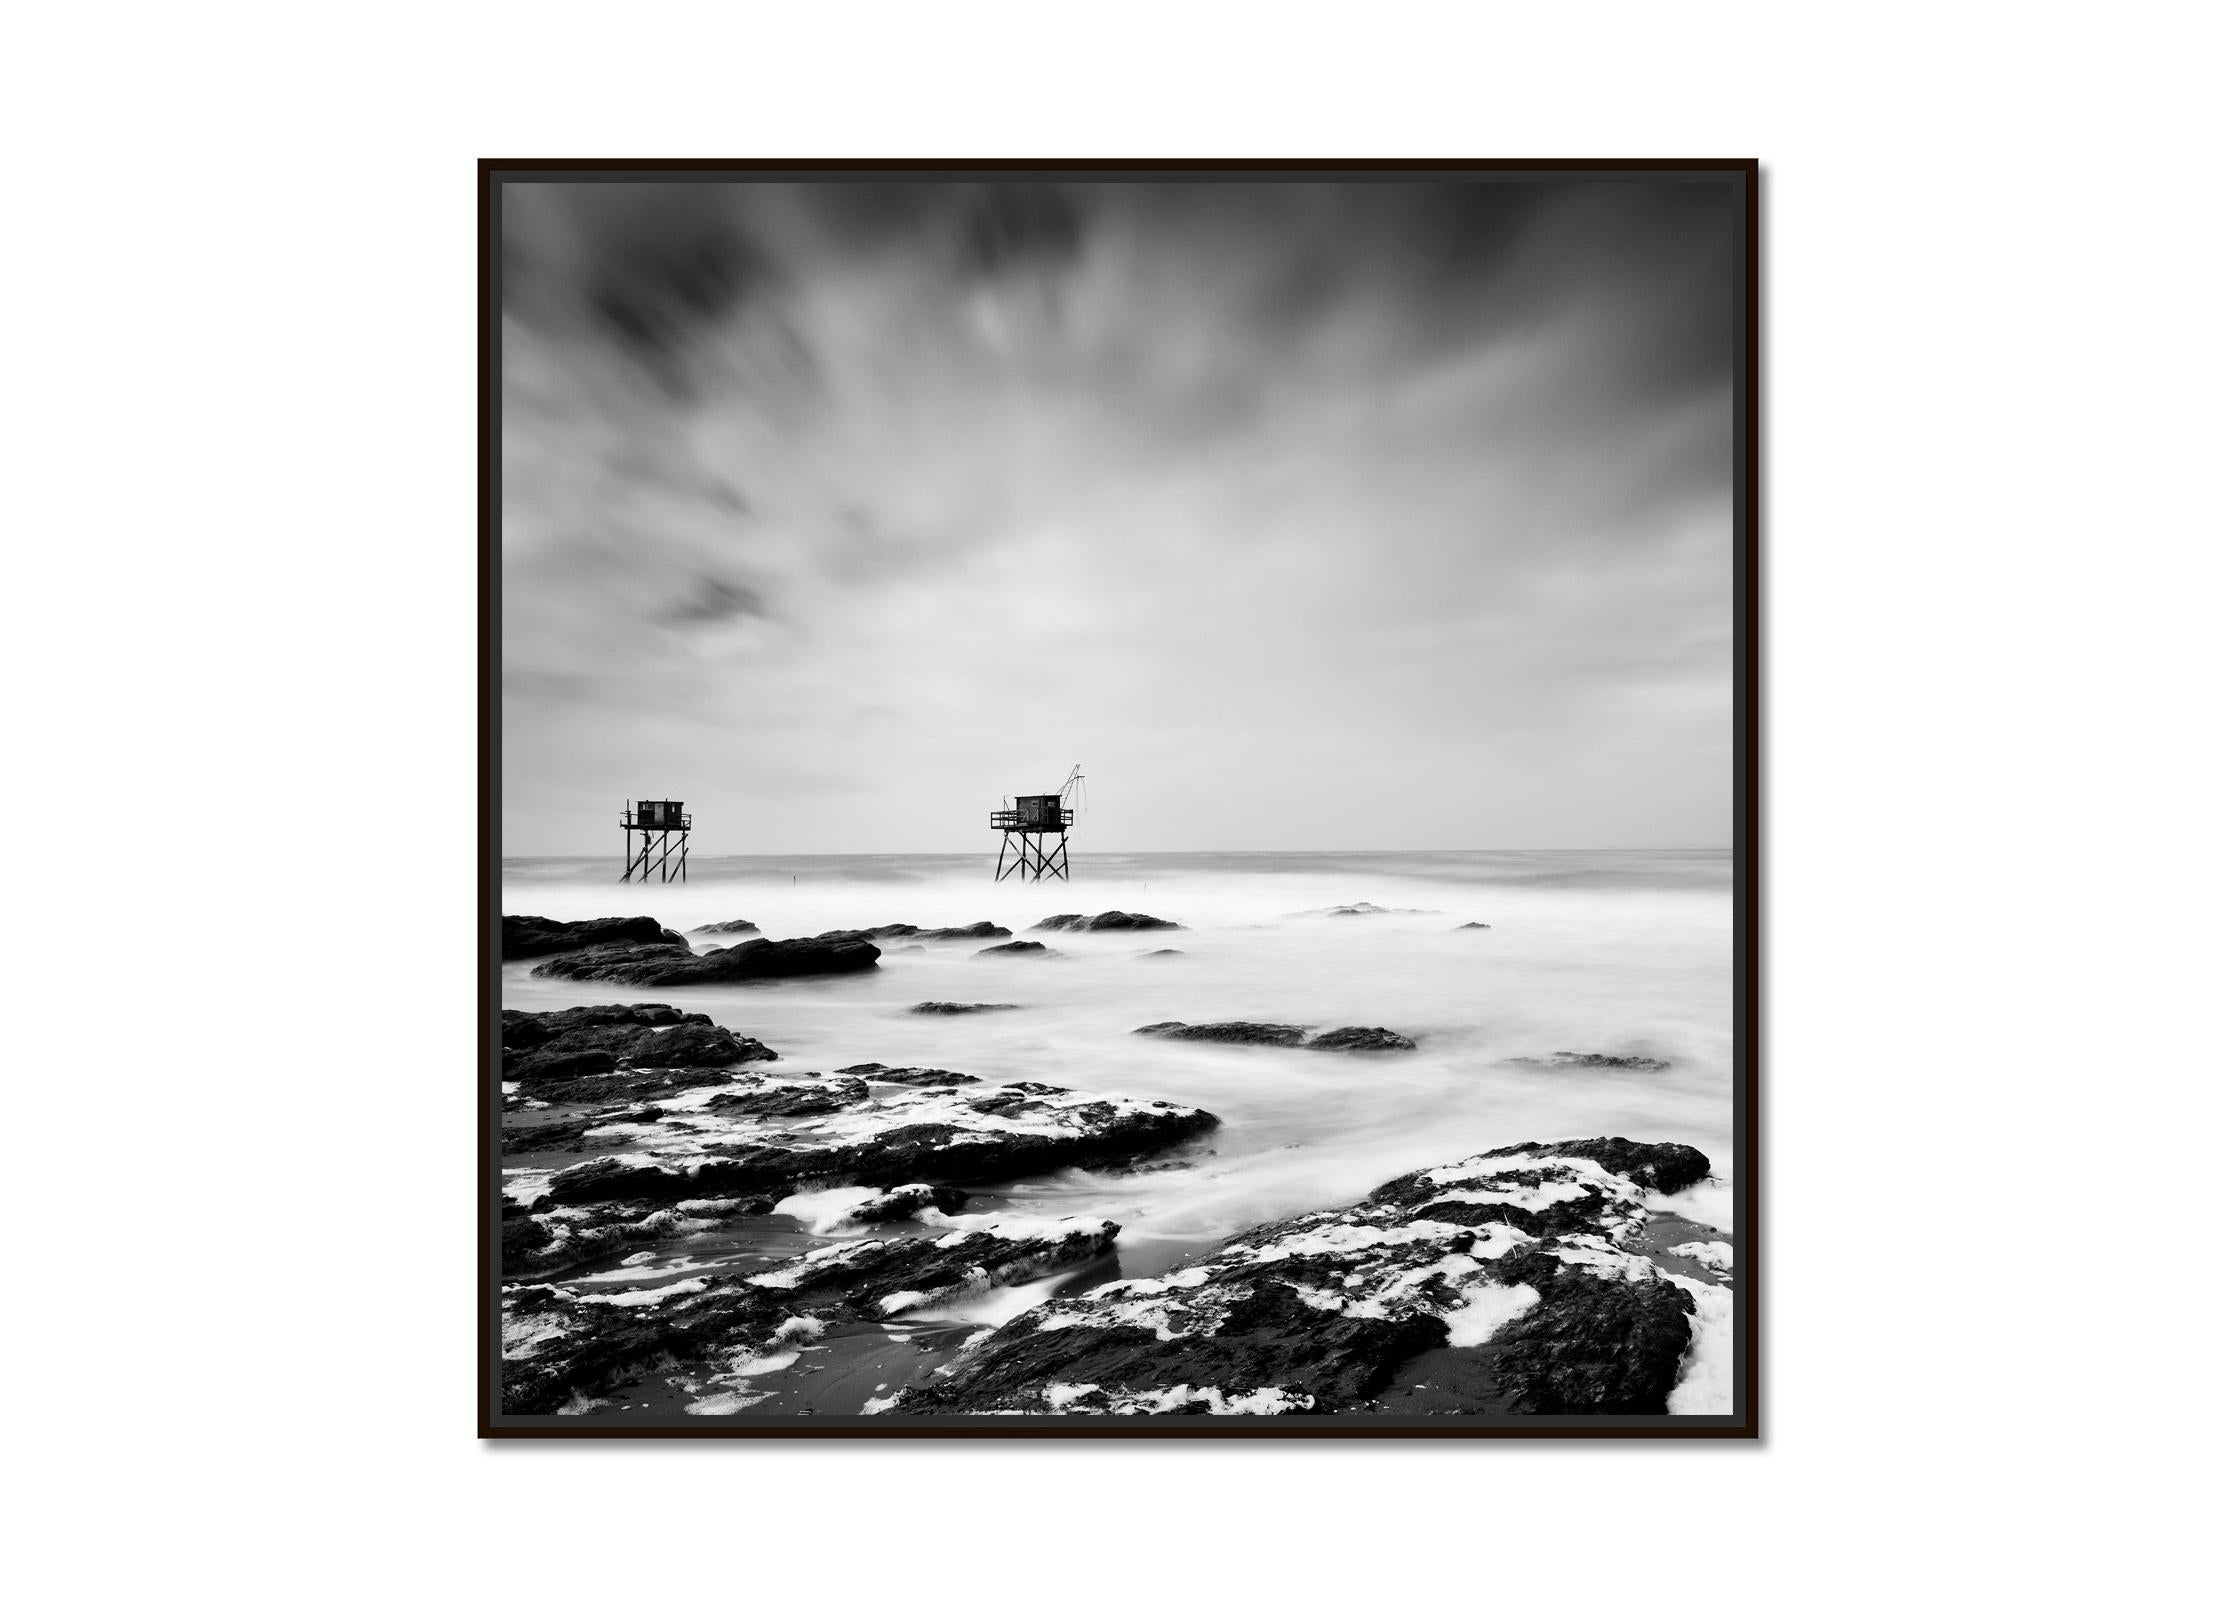 Fishing Hut on Stilts, coast of Atlantic Ocean, black and white waterscape - Photograph by Gerald Berghammer